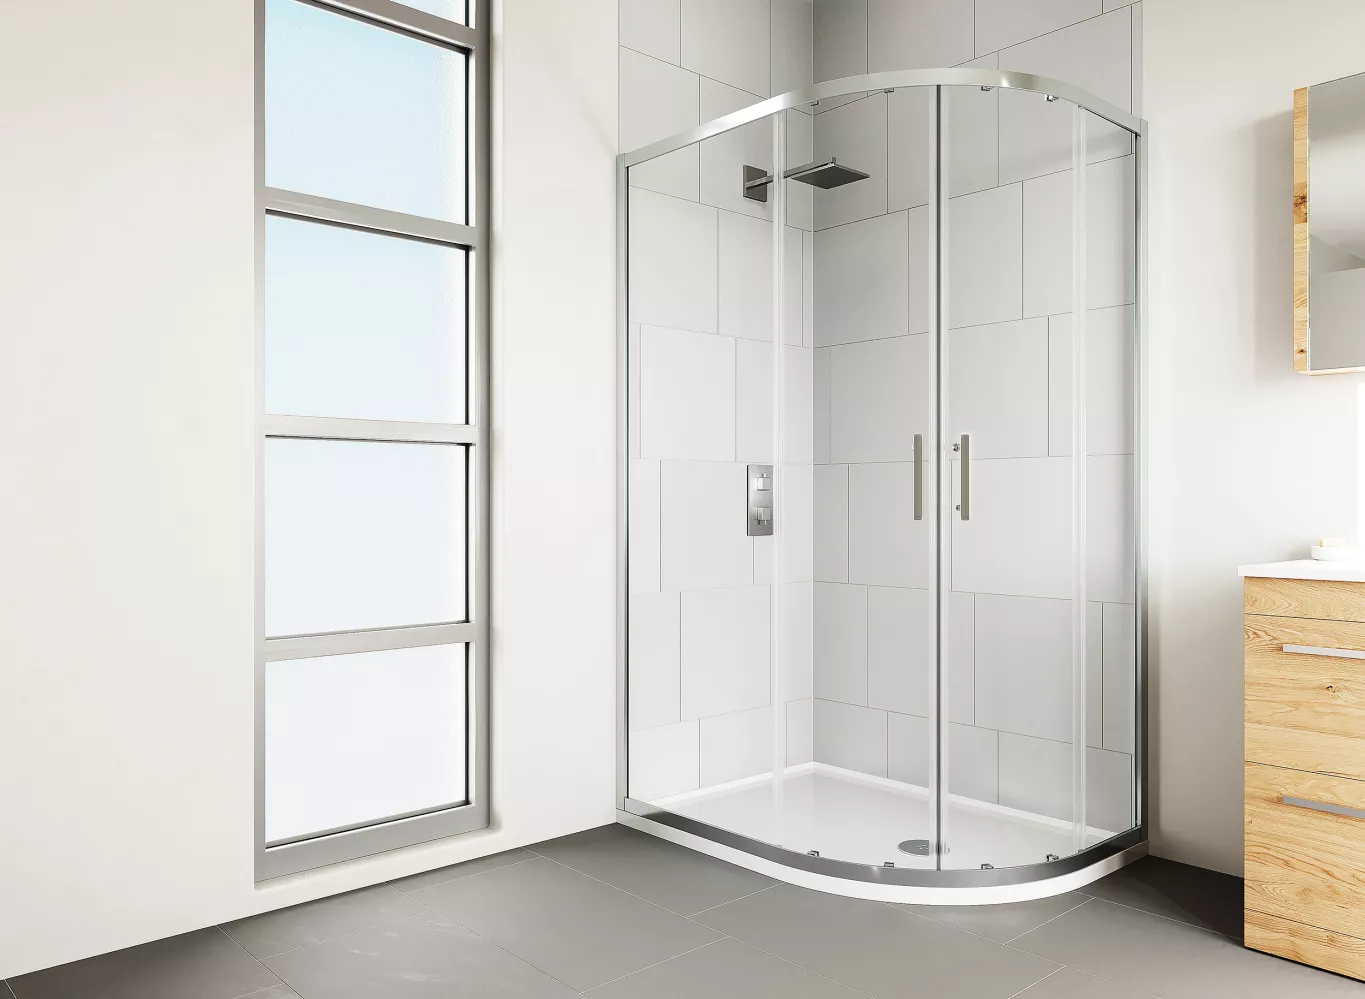 A sleek, modern shower door with curved glass and chrome finish